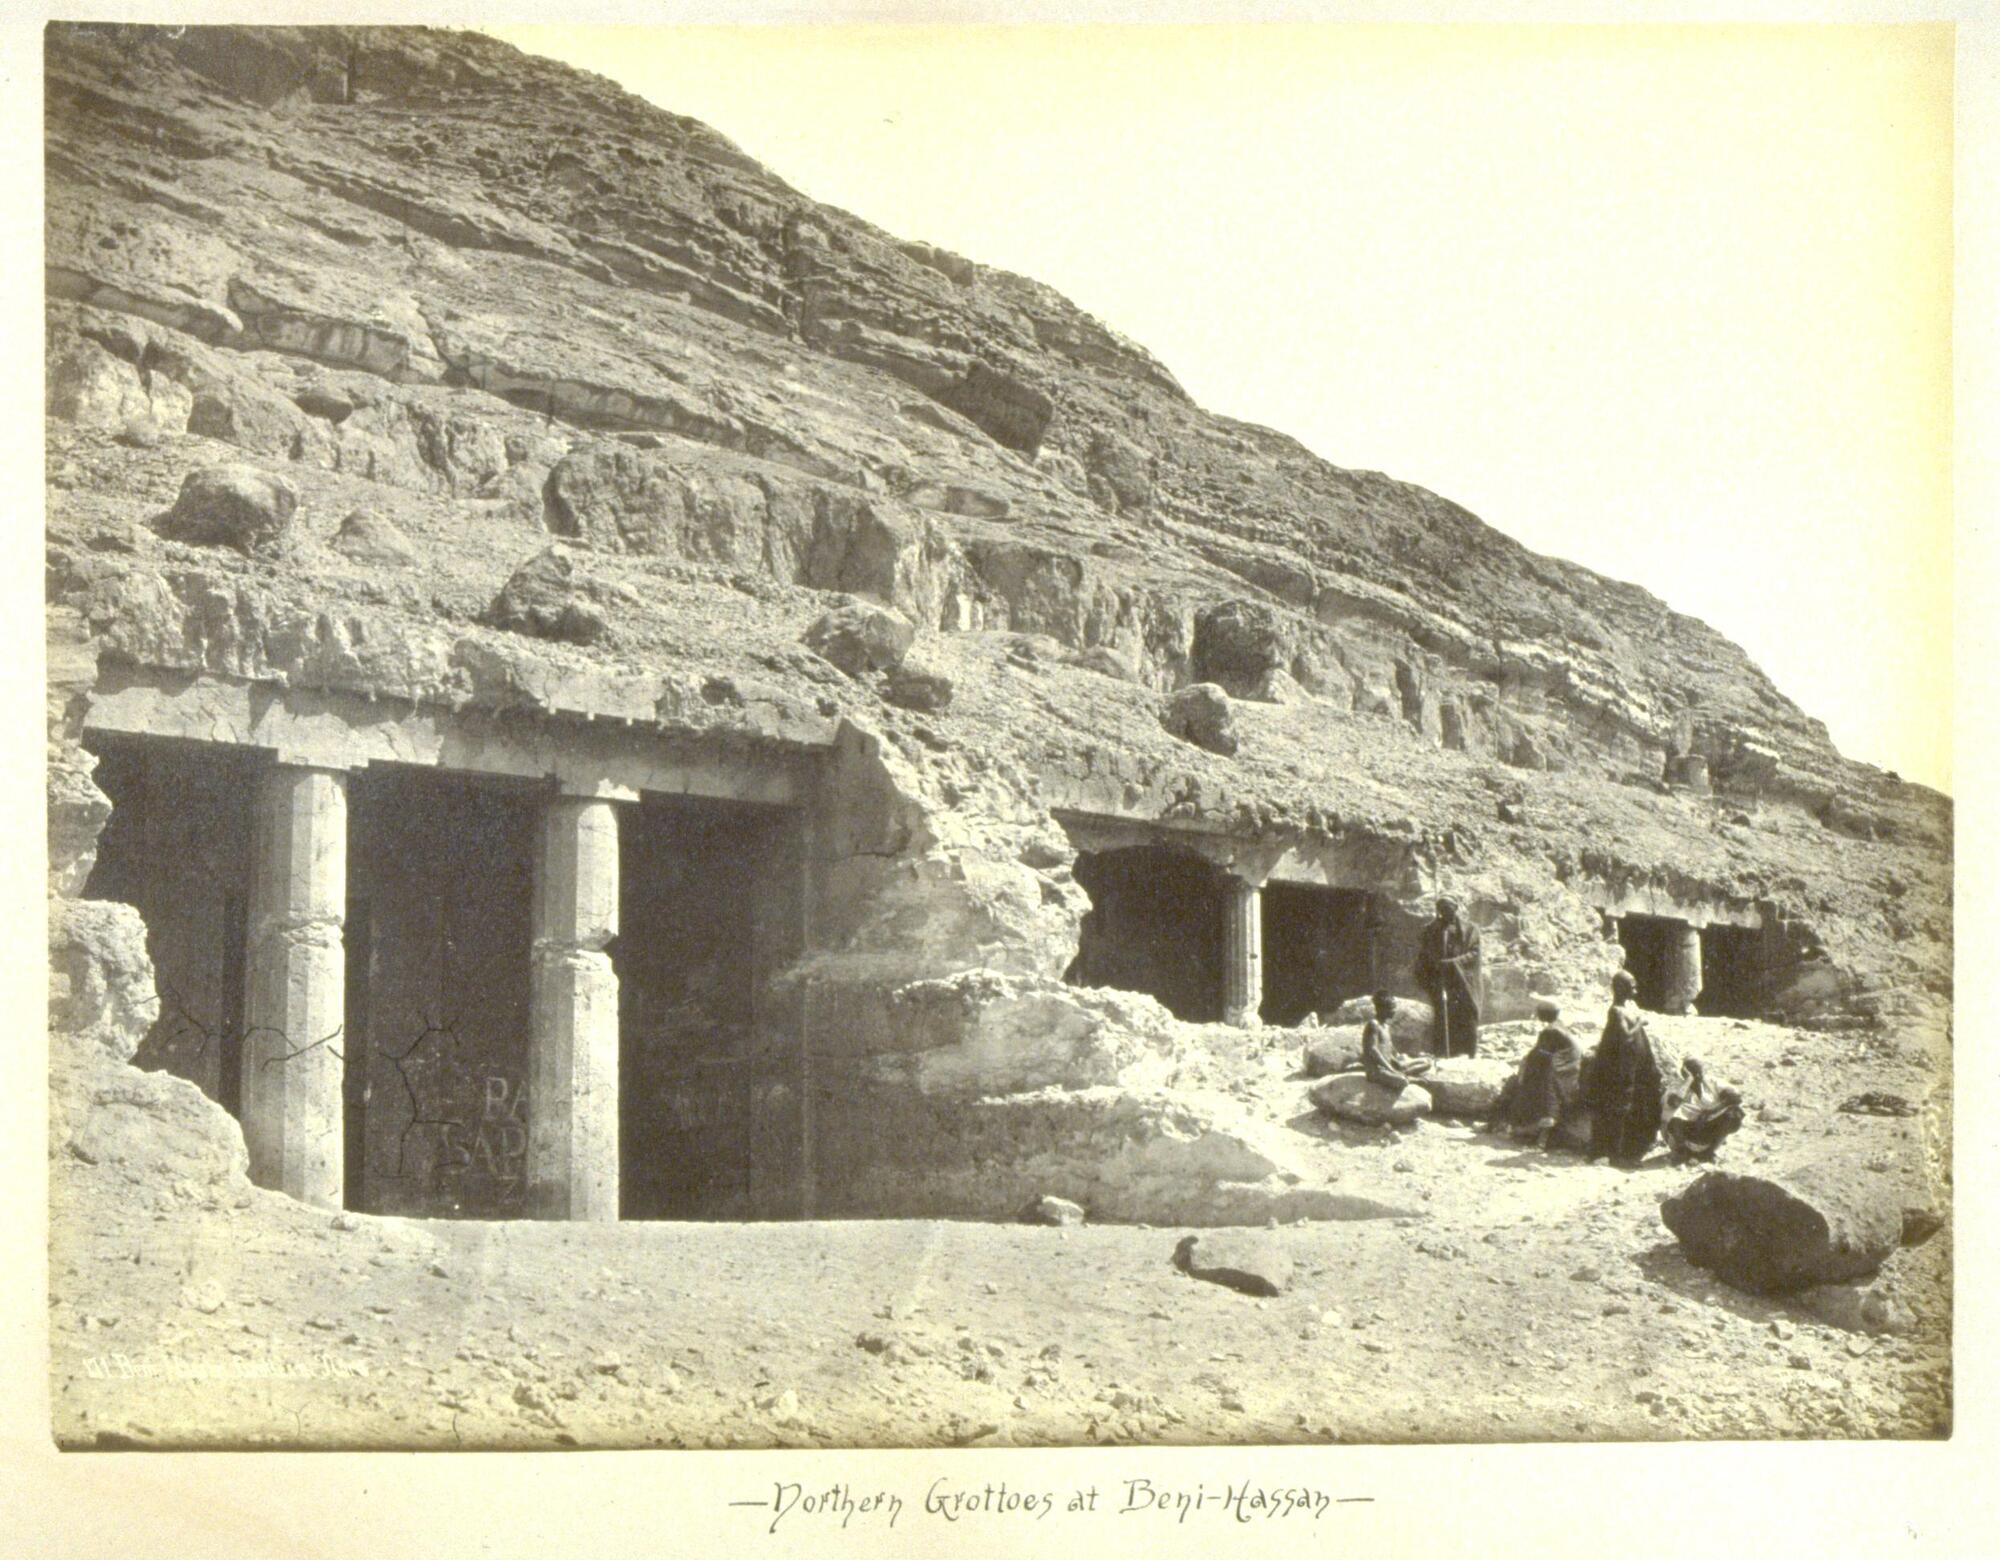 Five men sit just outside the rectangular, columned entrances of three grottoes set into the side of a hill. 